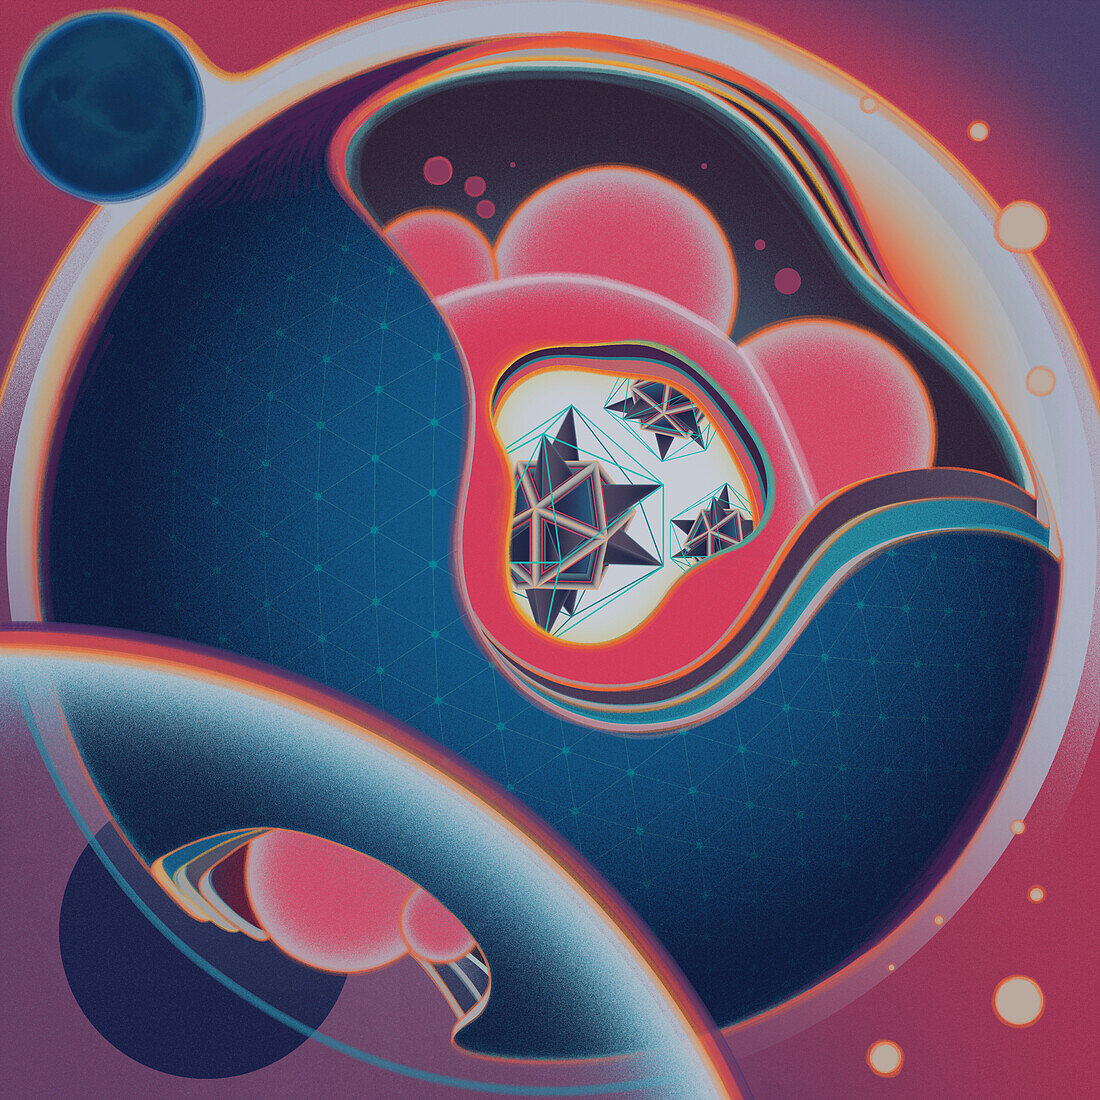 Subatomic particles, abstract illustration